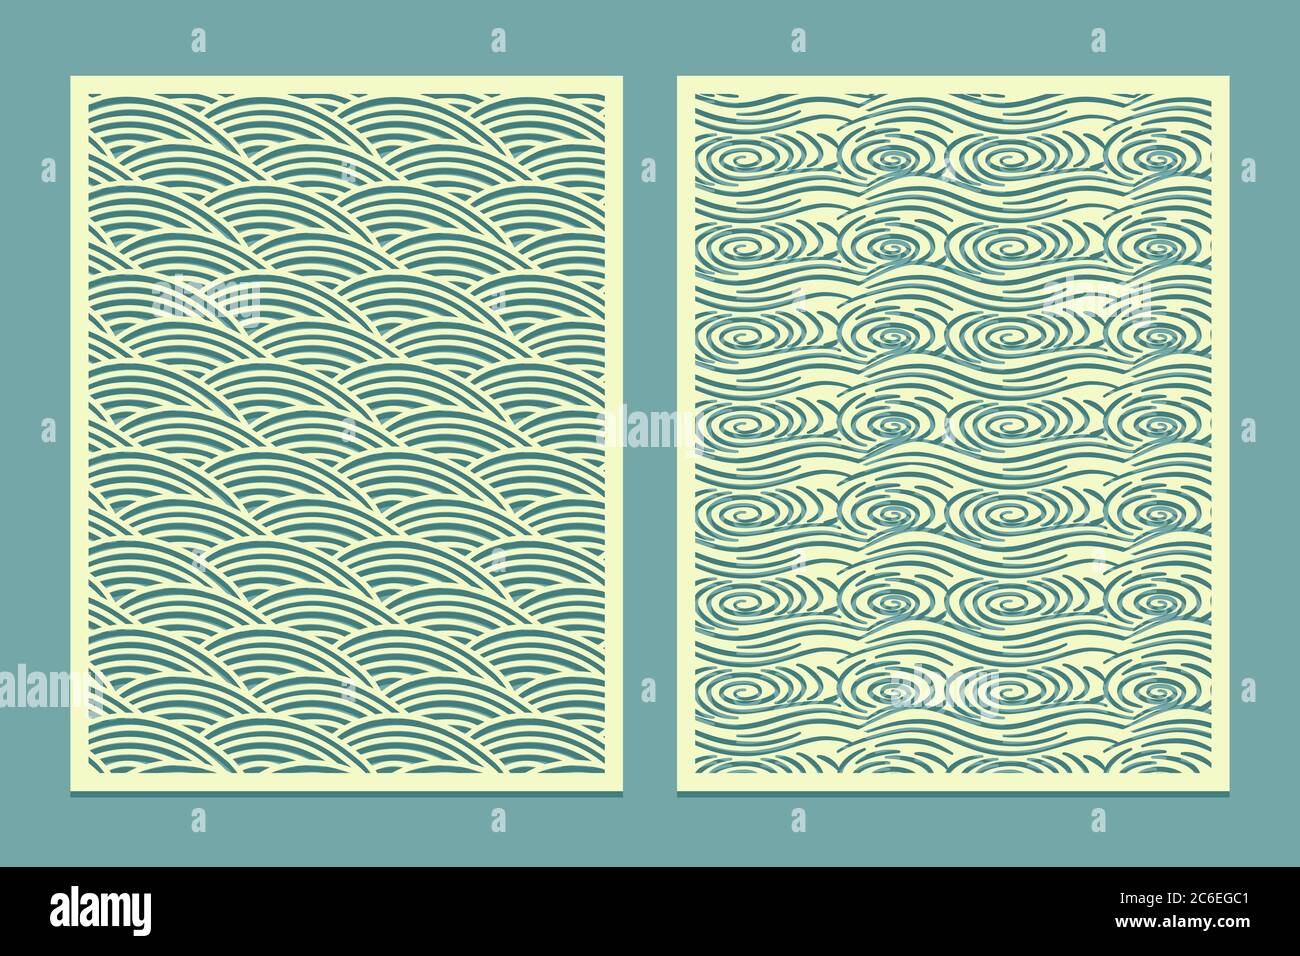 Set template for cutting Patterns marine waves Oriental style scenery Metal cutting or wood carving, panel design stencil for fretwork paper art card Stock Vector